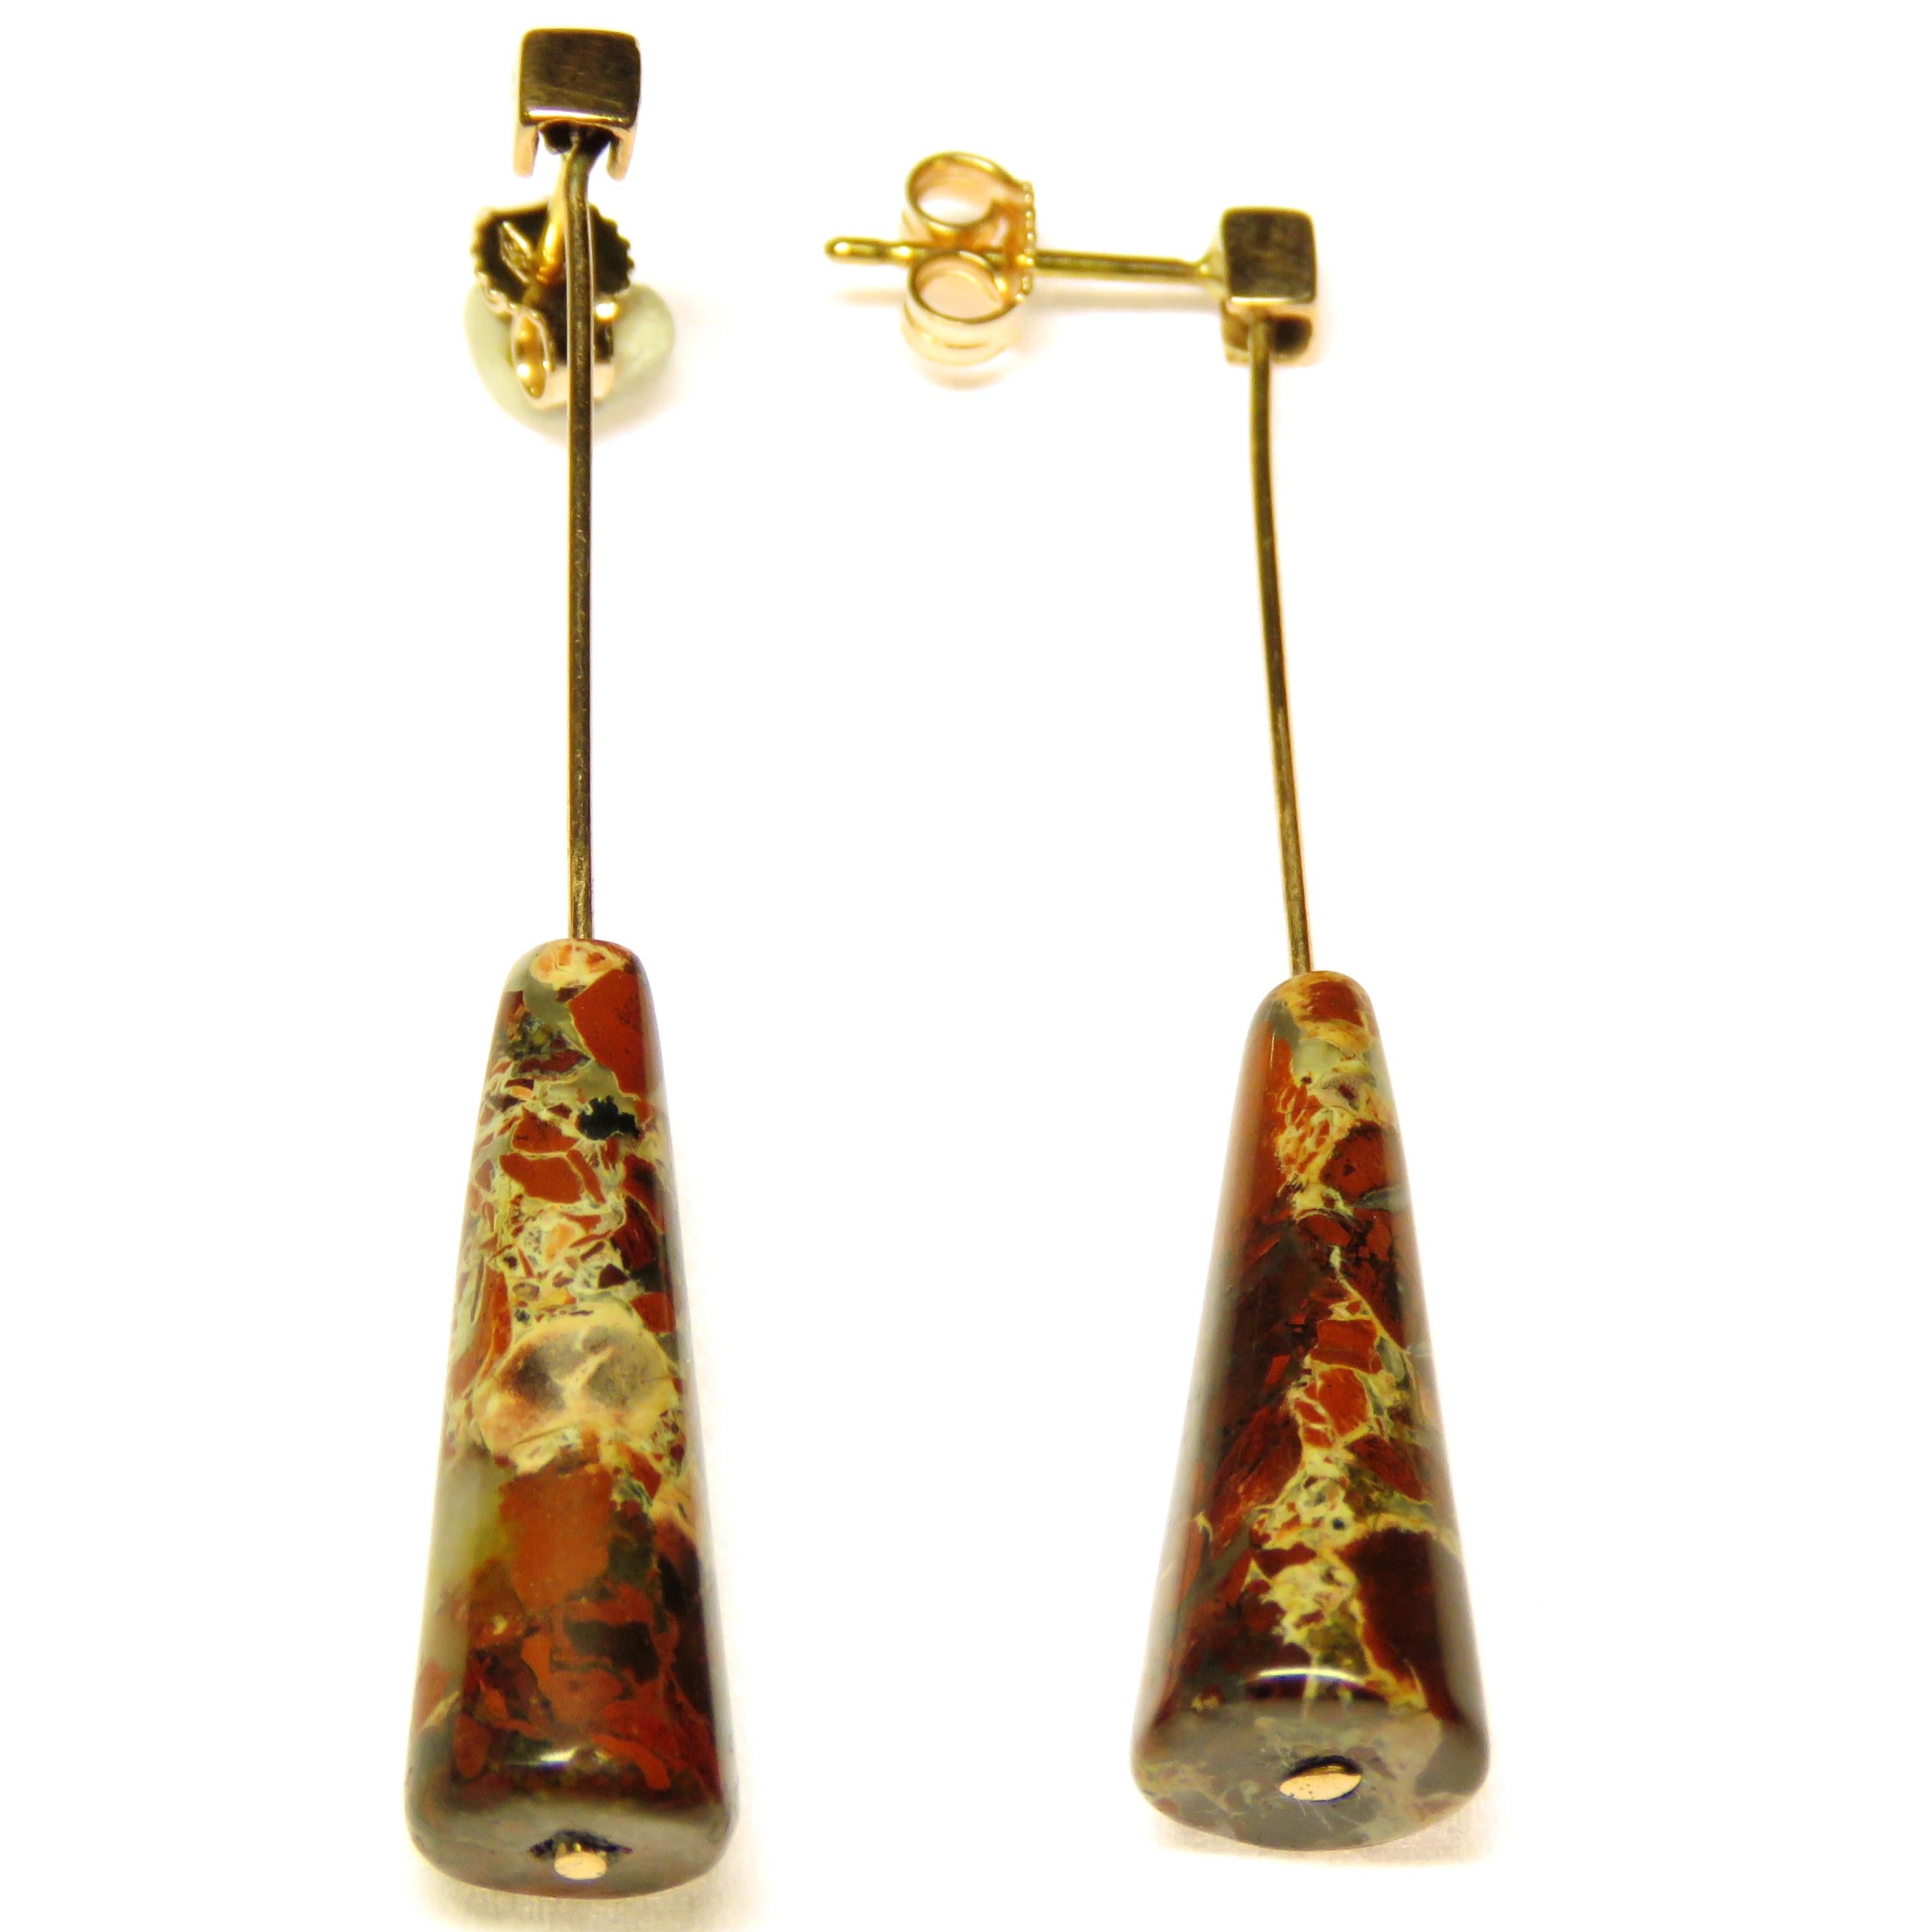 Modern Dentritic Agate Rose Gold Earrings Handcrafted in Italy by Botta Gioielli 1